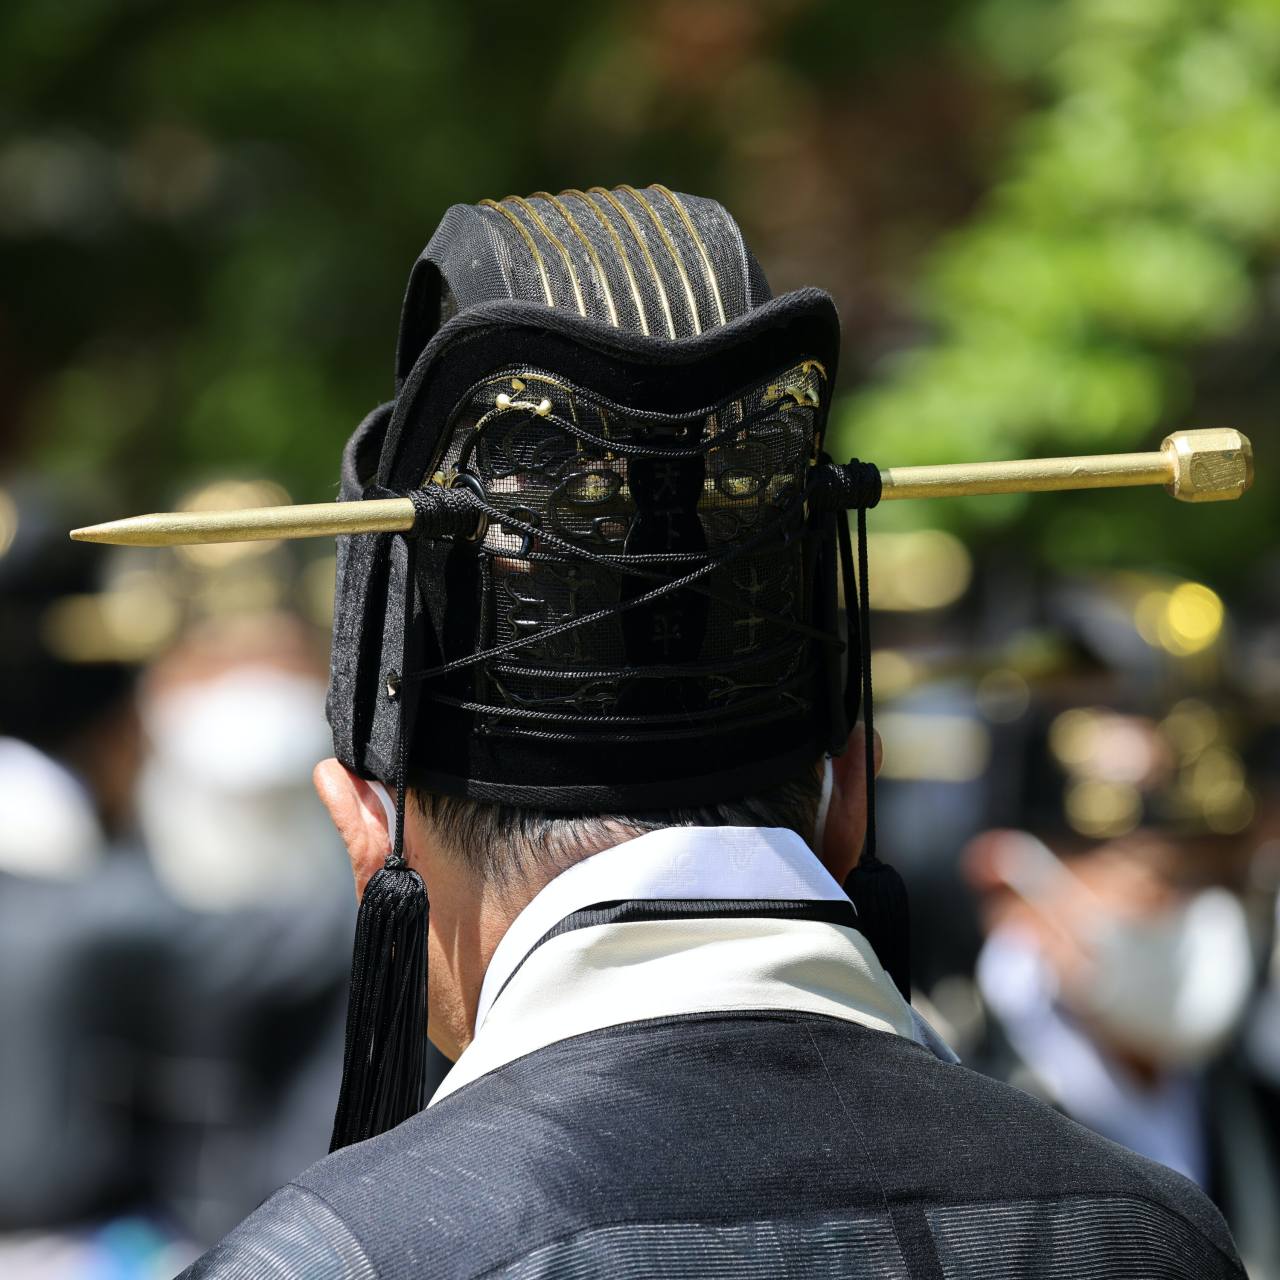 A hairpin called “gae,” used secure a male officiant‘s headgear called “yangguan,” is seen at an annual royal ancestral rite with court music at Jongmyo Shrine in Seoul. Photo © Hyungwon Kang